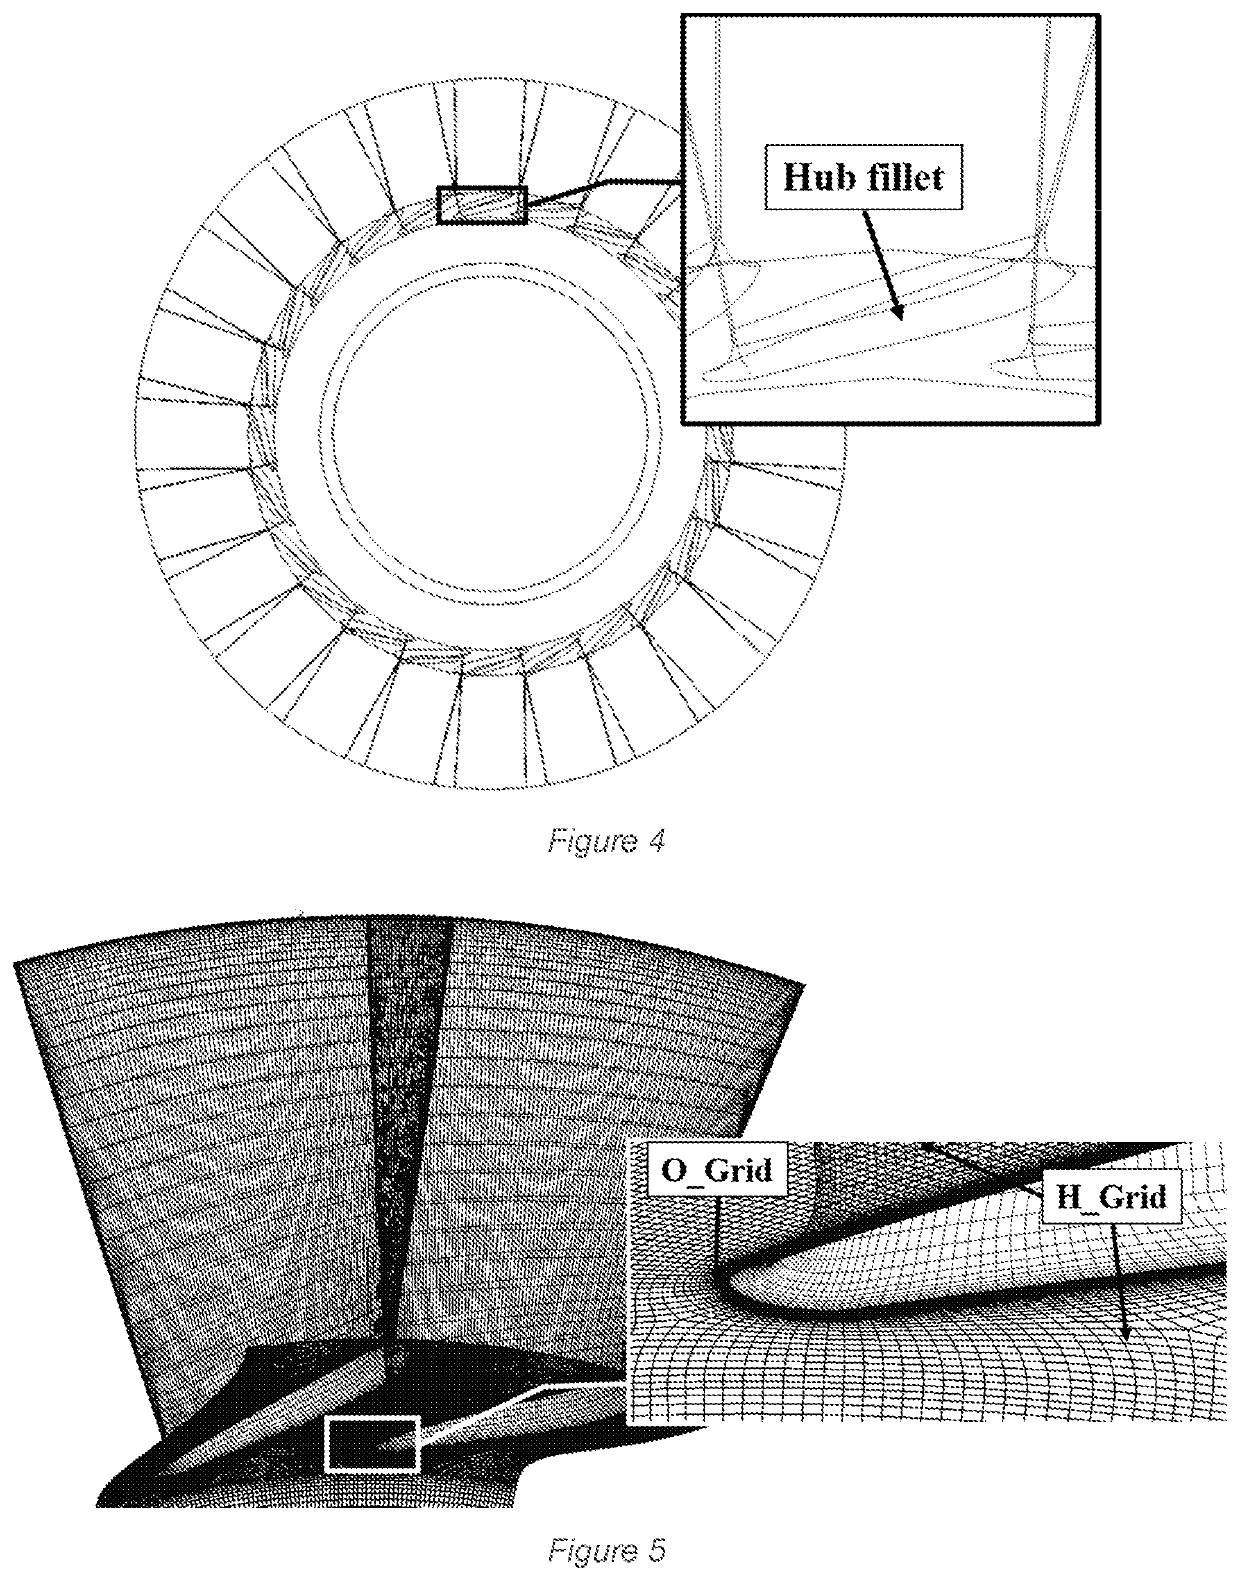 Modeling and calculation aerodynamic performances of multi-stage transonic axial compressors